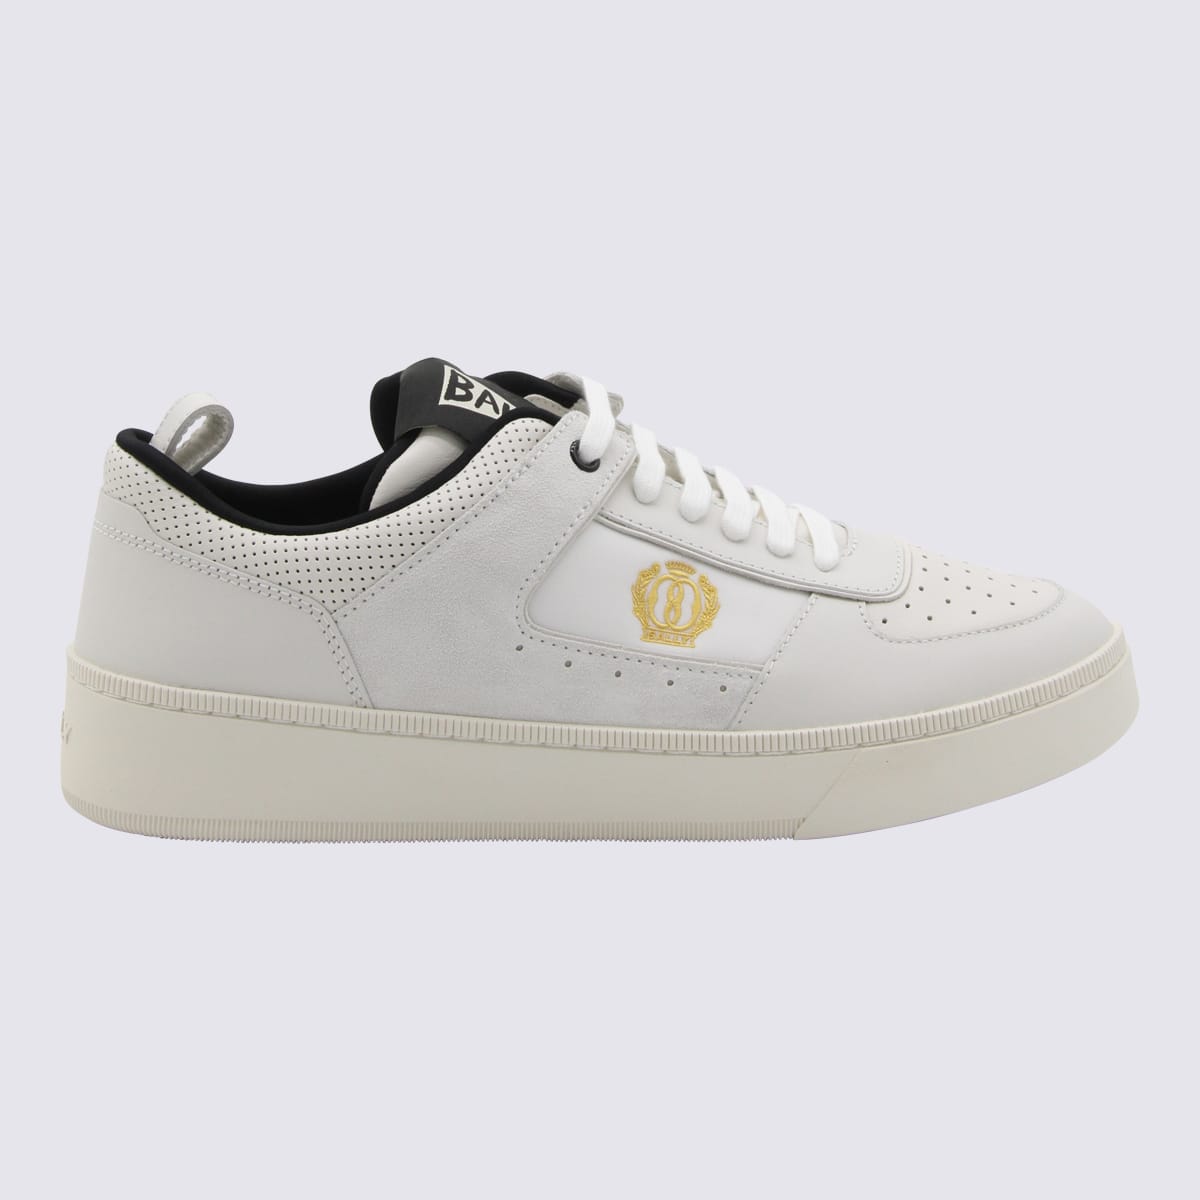 Bally White And Black Leather Raise Trainers